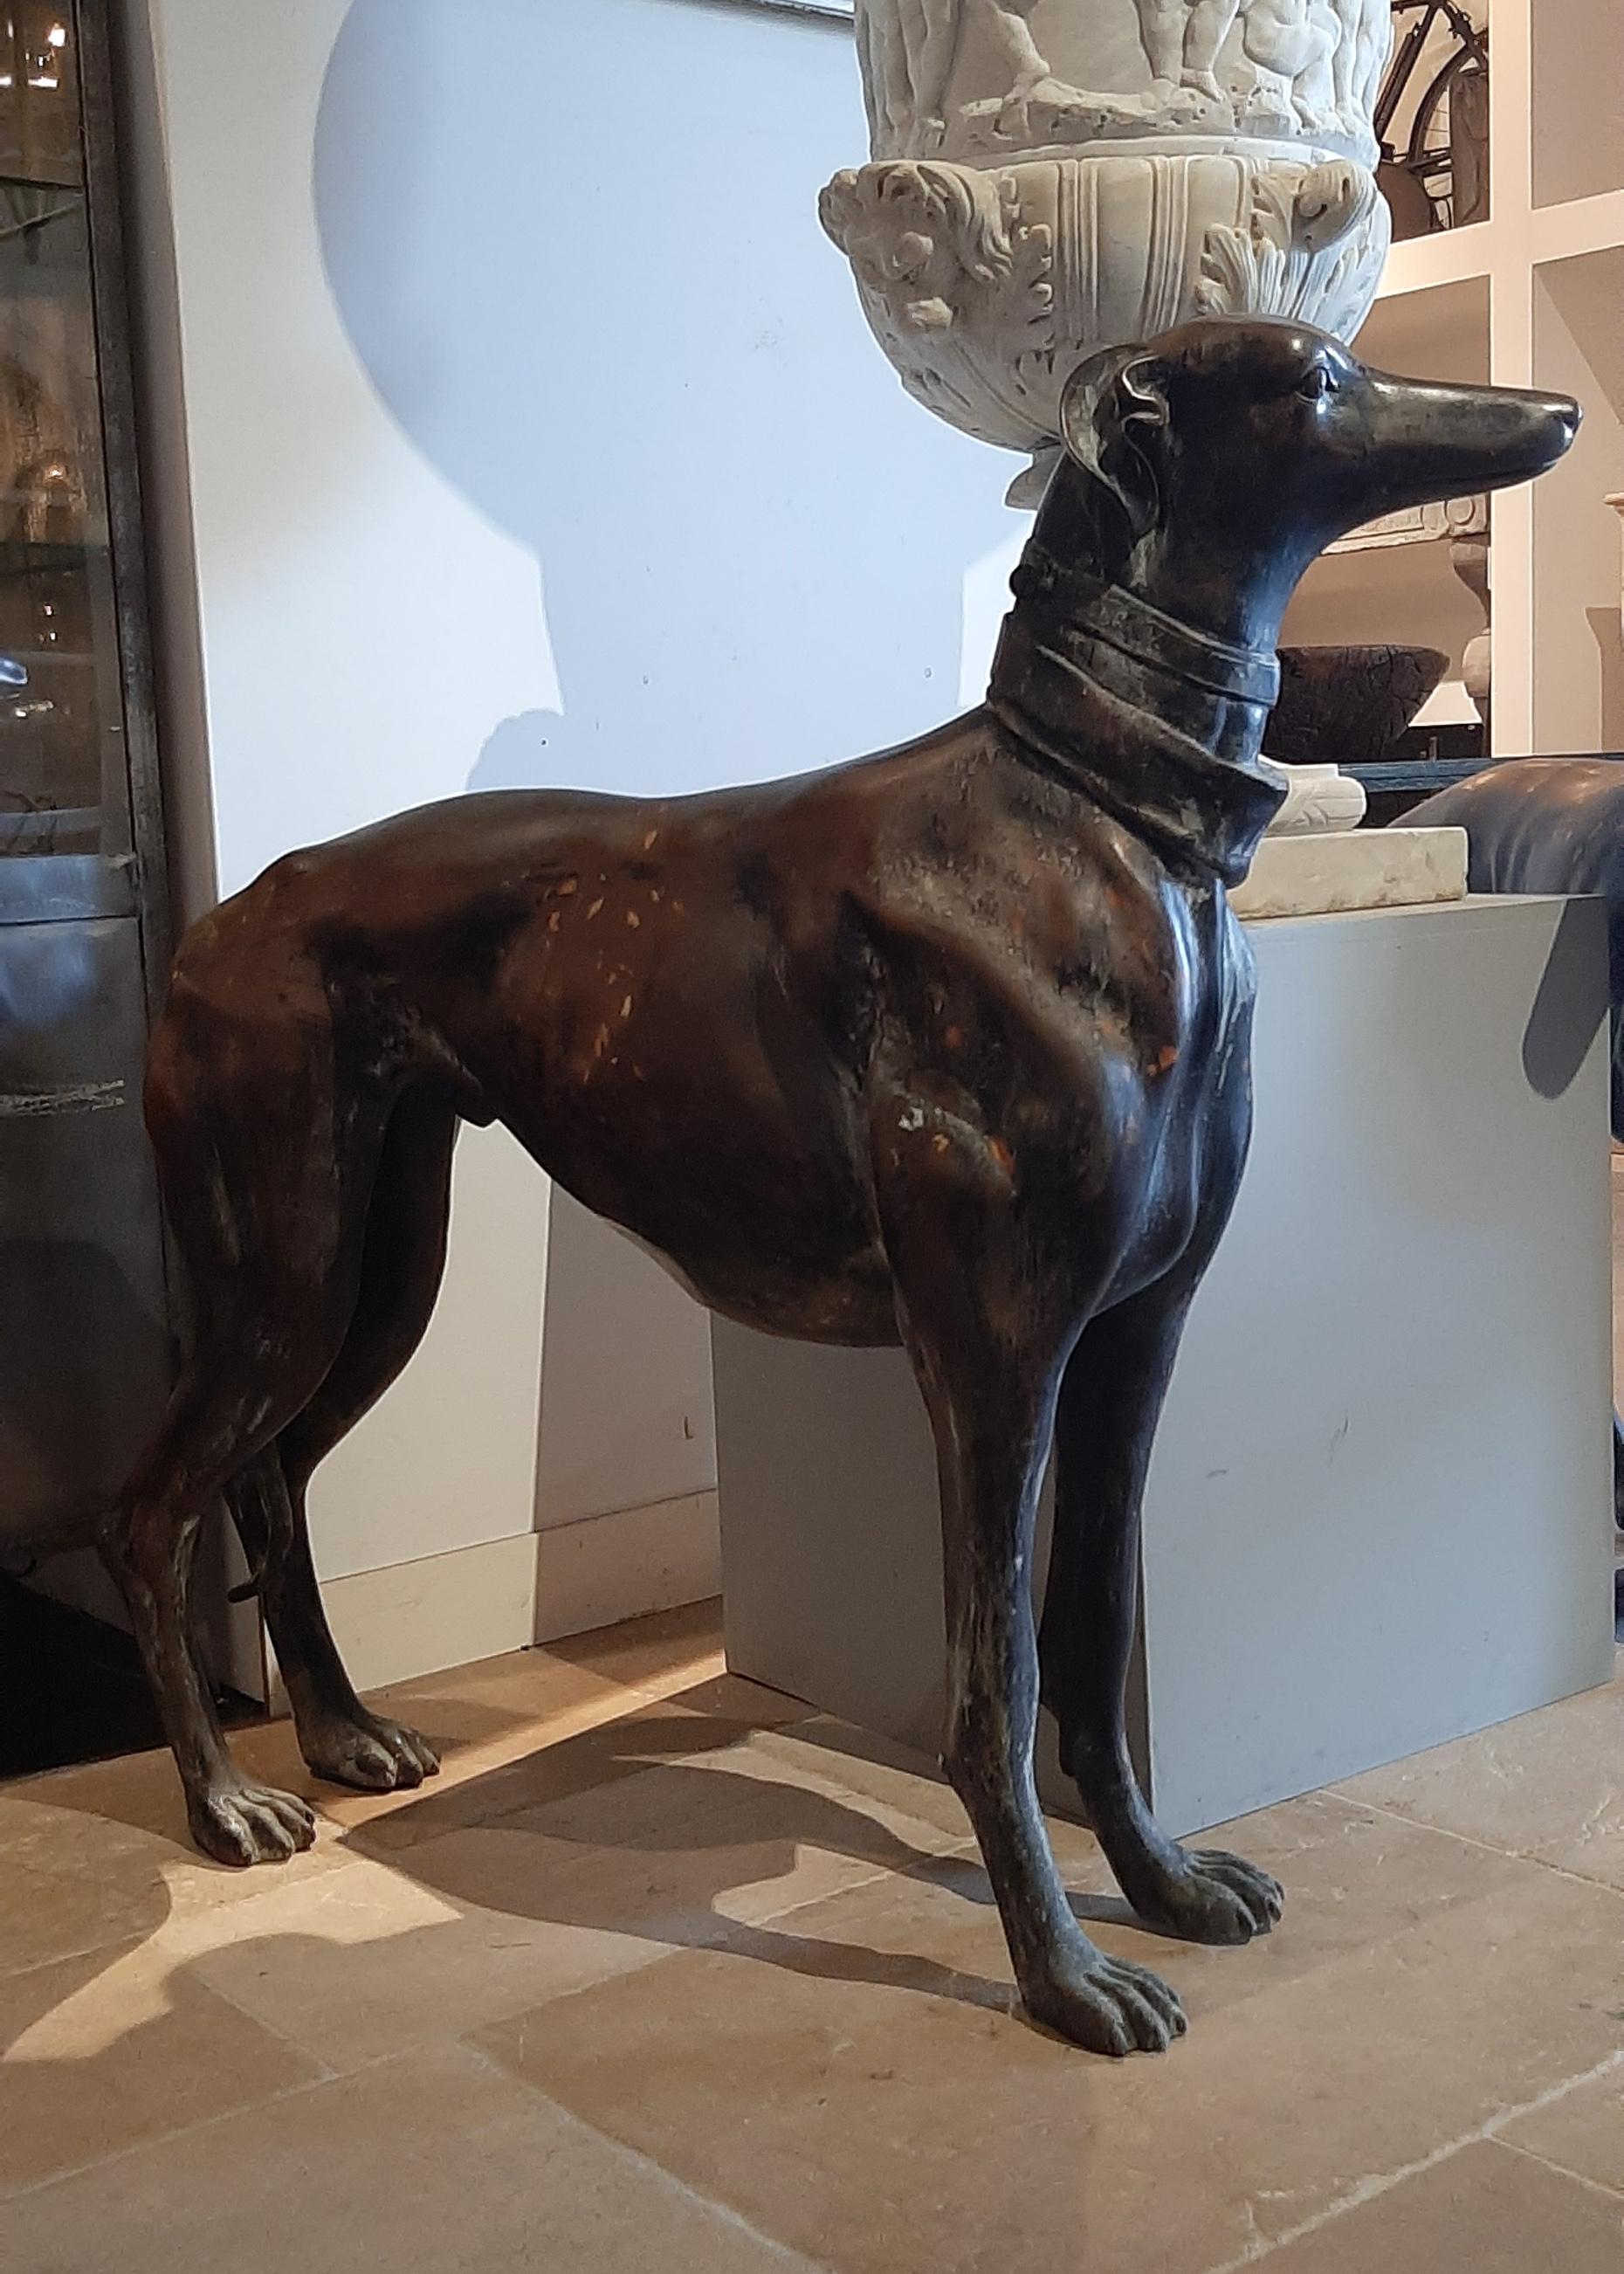 Beautiful set of two lifesize bronze statues of a male and female greyhound from the early 20th Century. These are reproductions inspired by the original 19th century bronze greyhound statue of the Royal greyhound Eos by John Francis. 

John